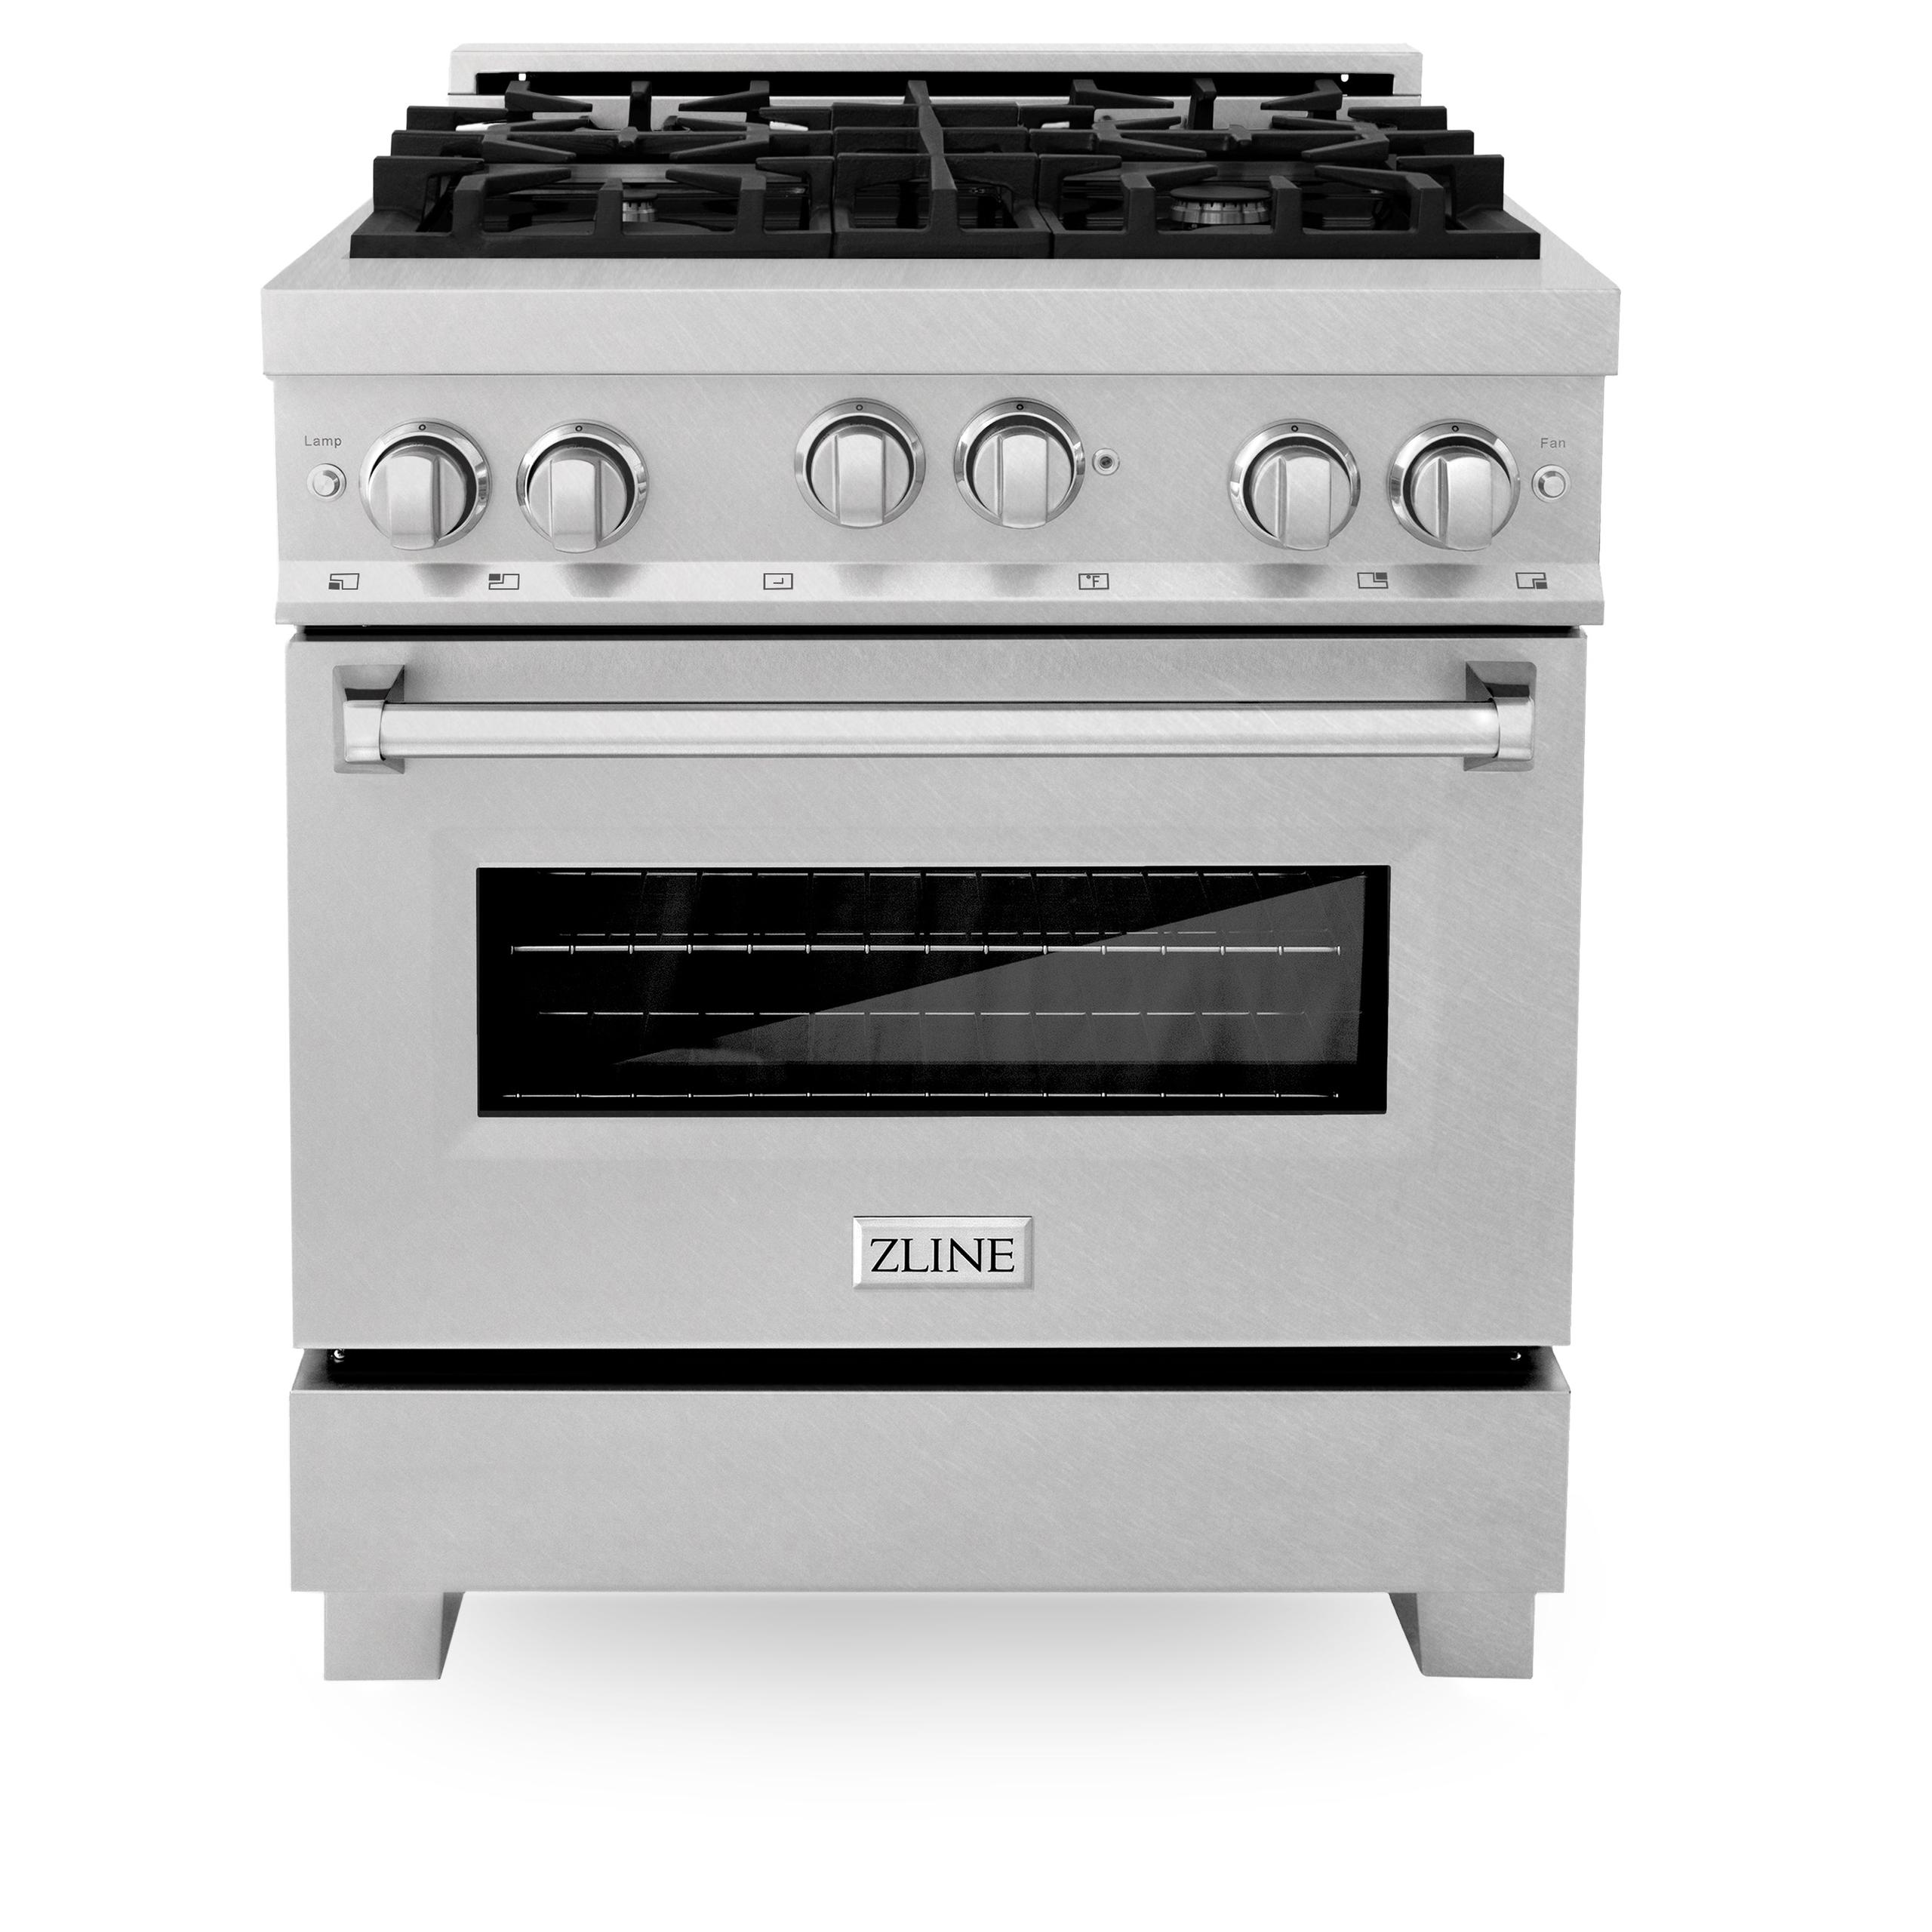 ZLINE KITCHEN AND BATH RGSBG30 ZLINE 30" 4.0 cu. ft. Range with Gas Stove and Gas Oven in DuraSnow R Stainless Steel with Color Door Options Color: Blue Gloss